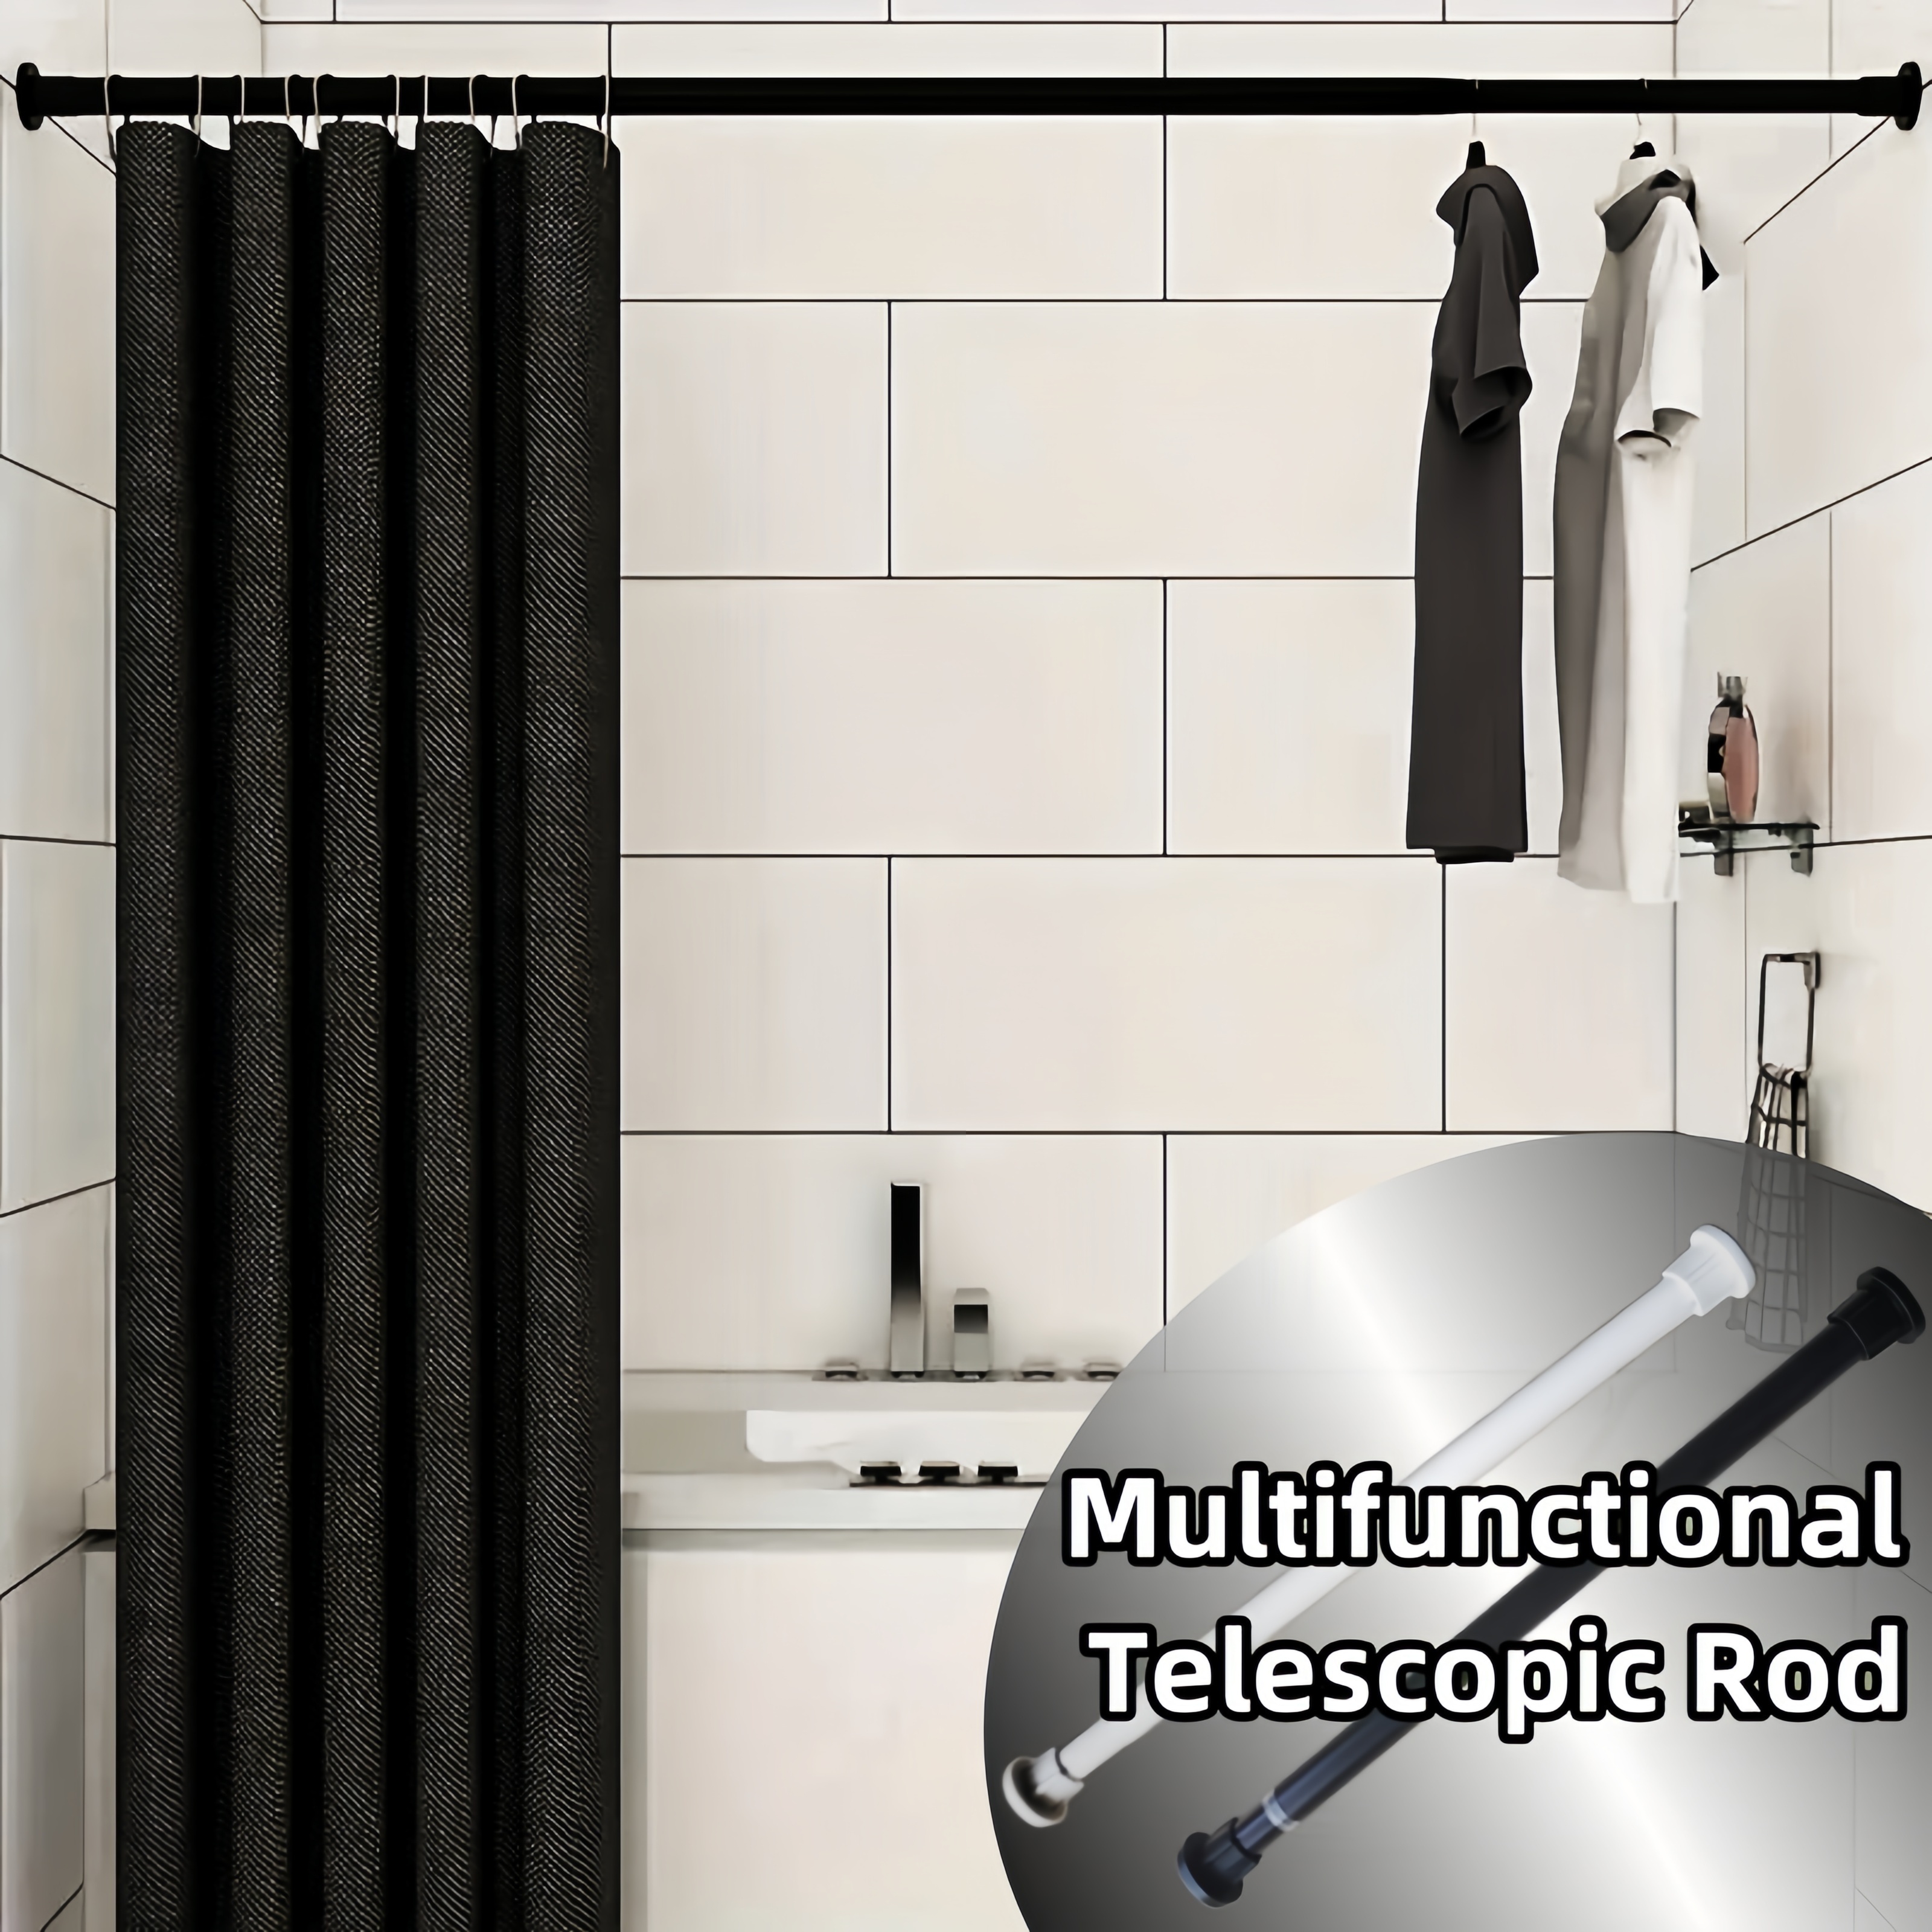 

1pc Multifunctional Telescopic Rod - Stainless Steel Non-slip Spring Tension Curtain Rod - Punch-free, Easy Install For Shower, Wardrobe Support, Drying - Black & White